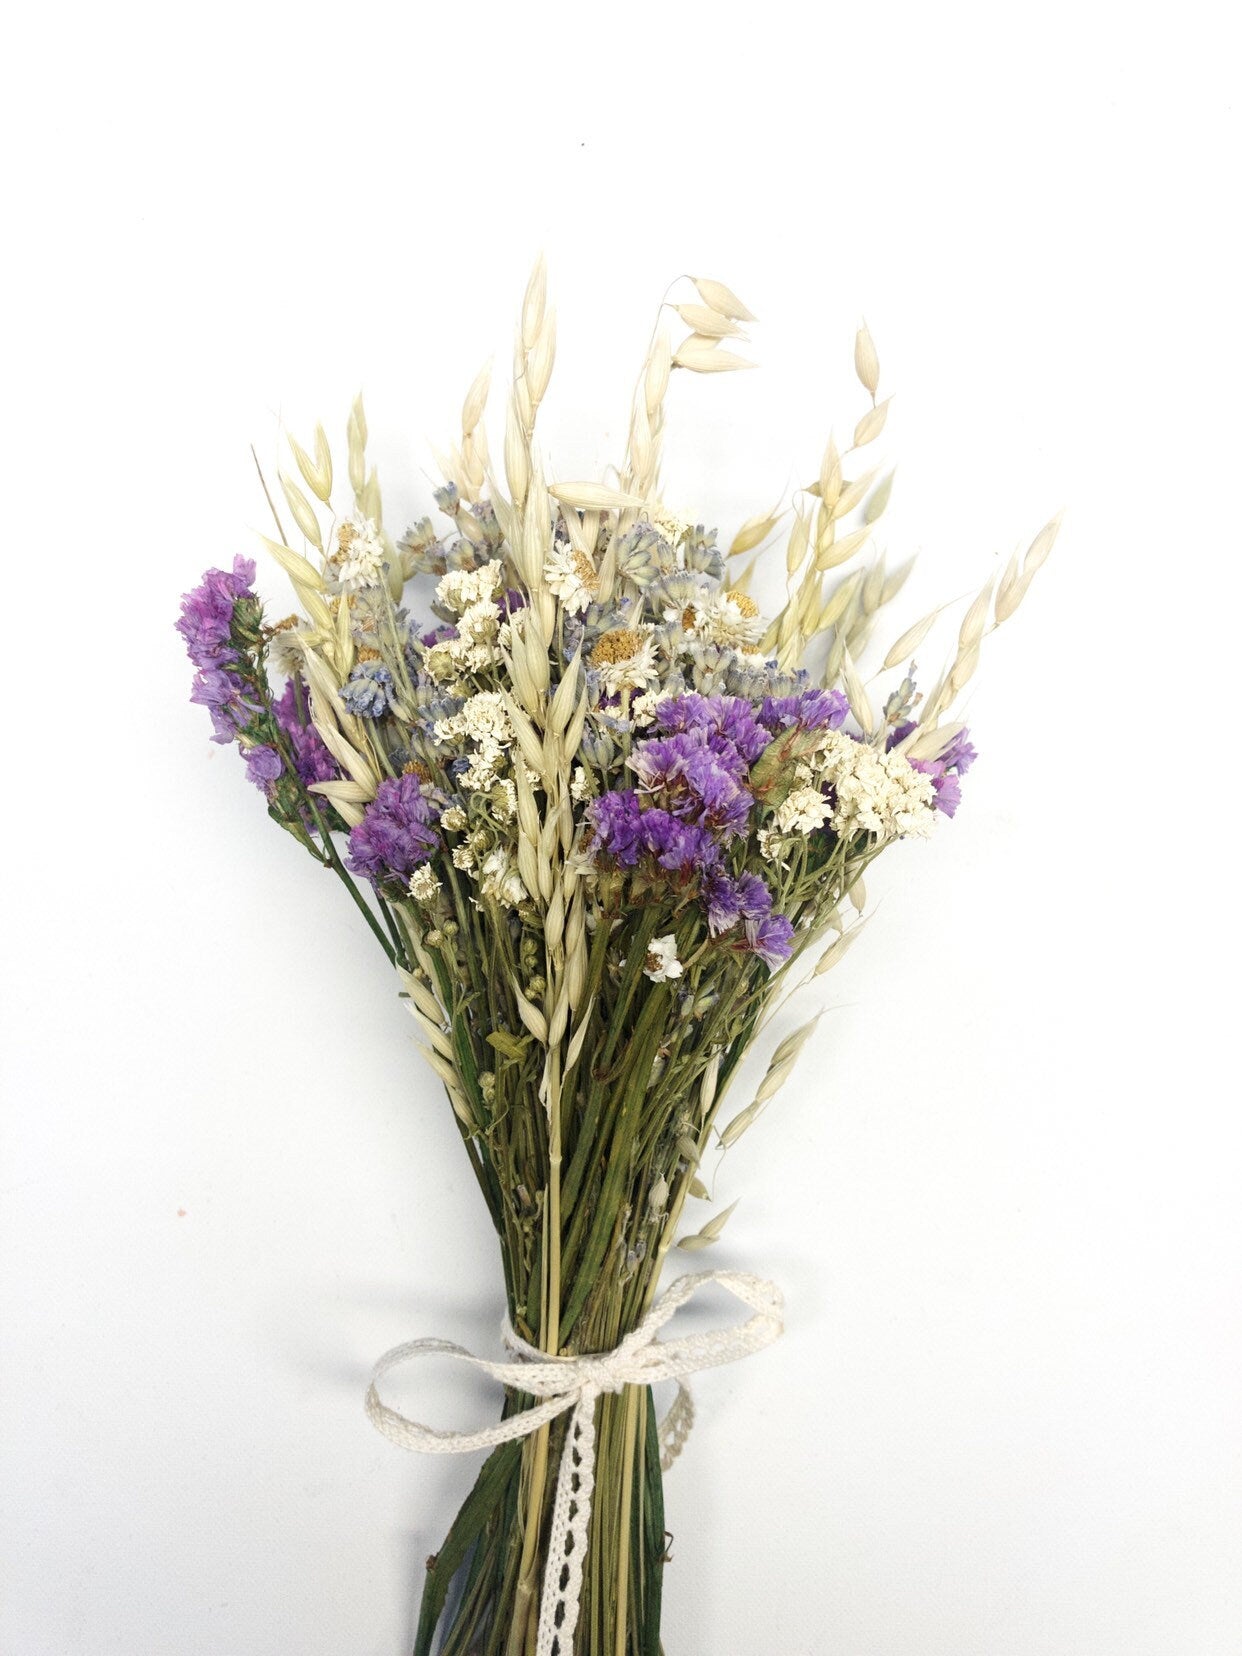 Purple Bouquet, Dried Oats, Lavender, Preserved Sinuata Statice, Spring, Purple, Violet, White, Ammonium, Preserved Flowers, Bridal, Wedding